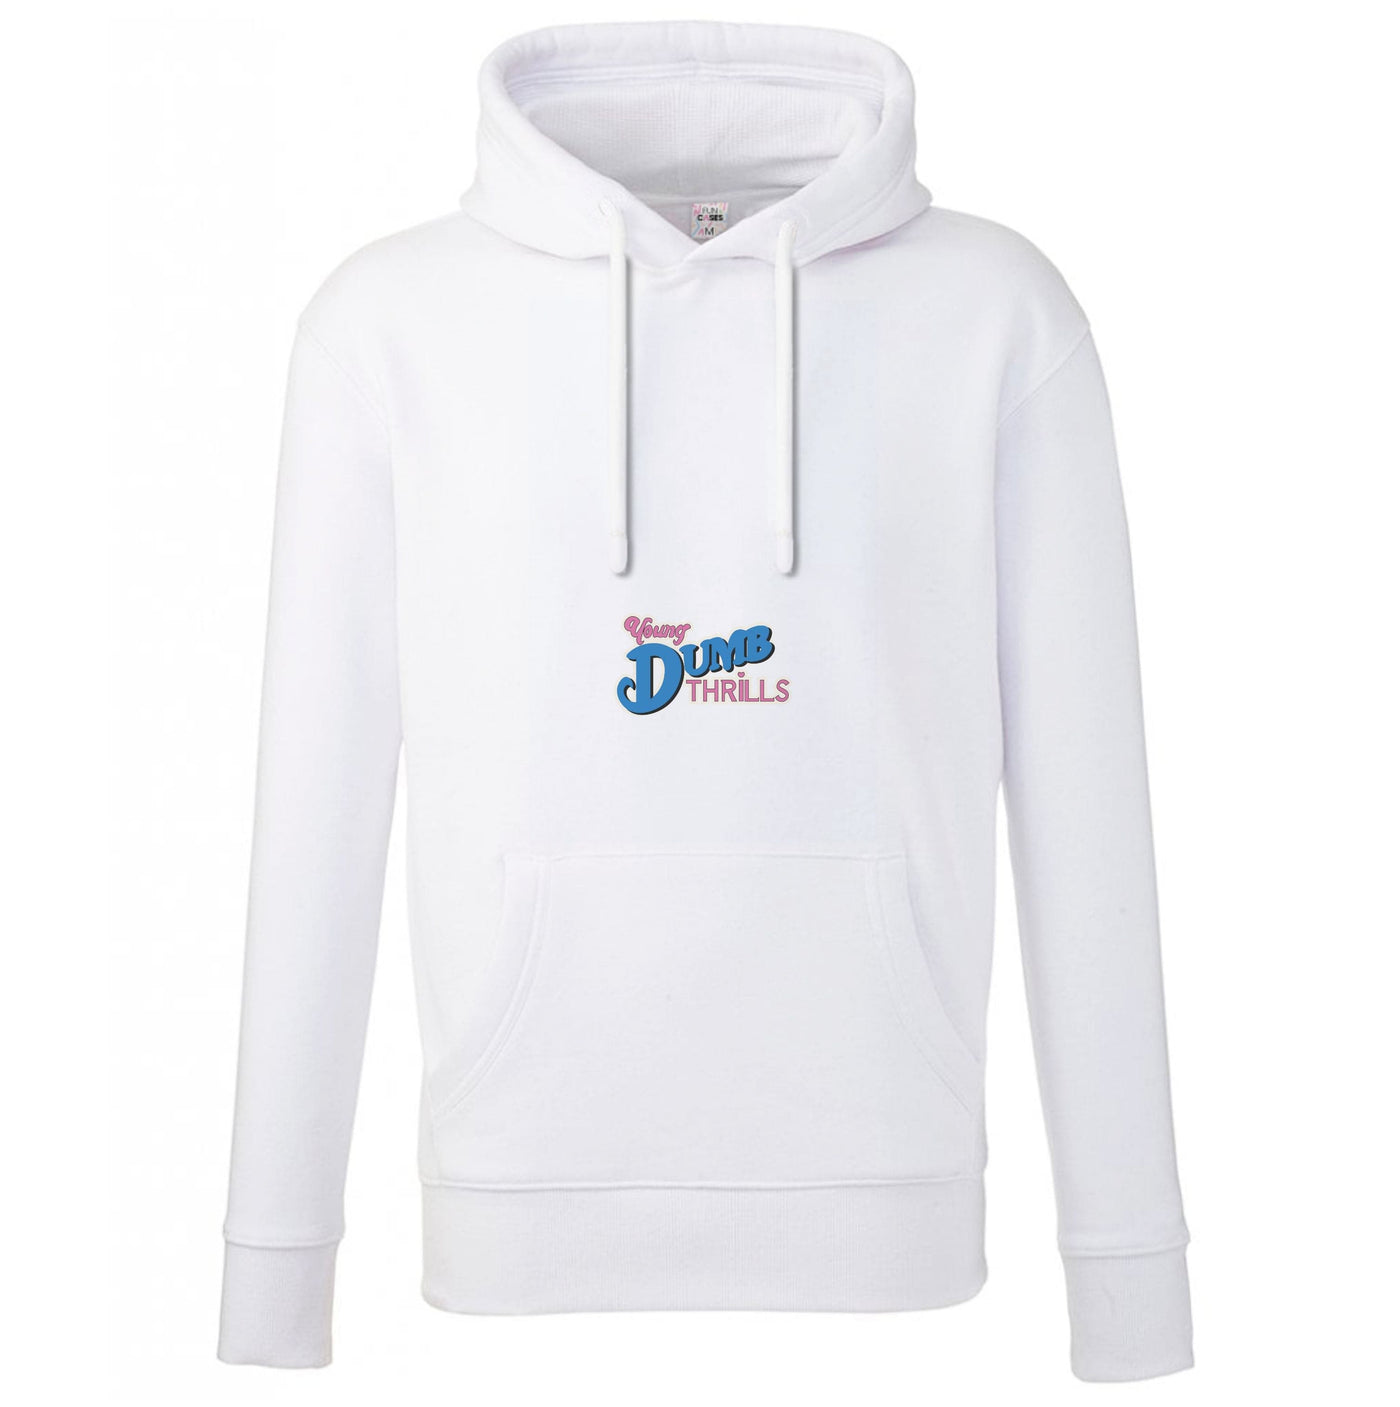 Young Dumb Thrills - Obviously - McFly Hoodie